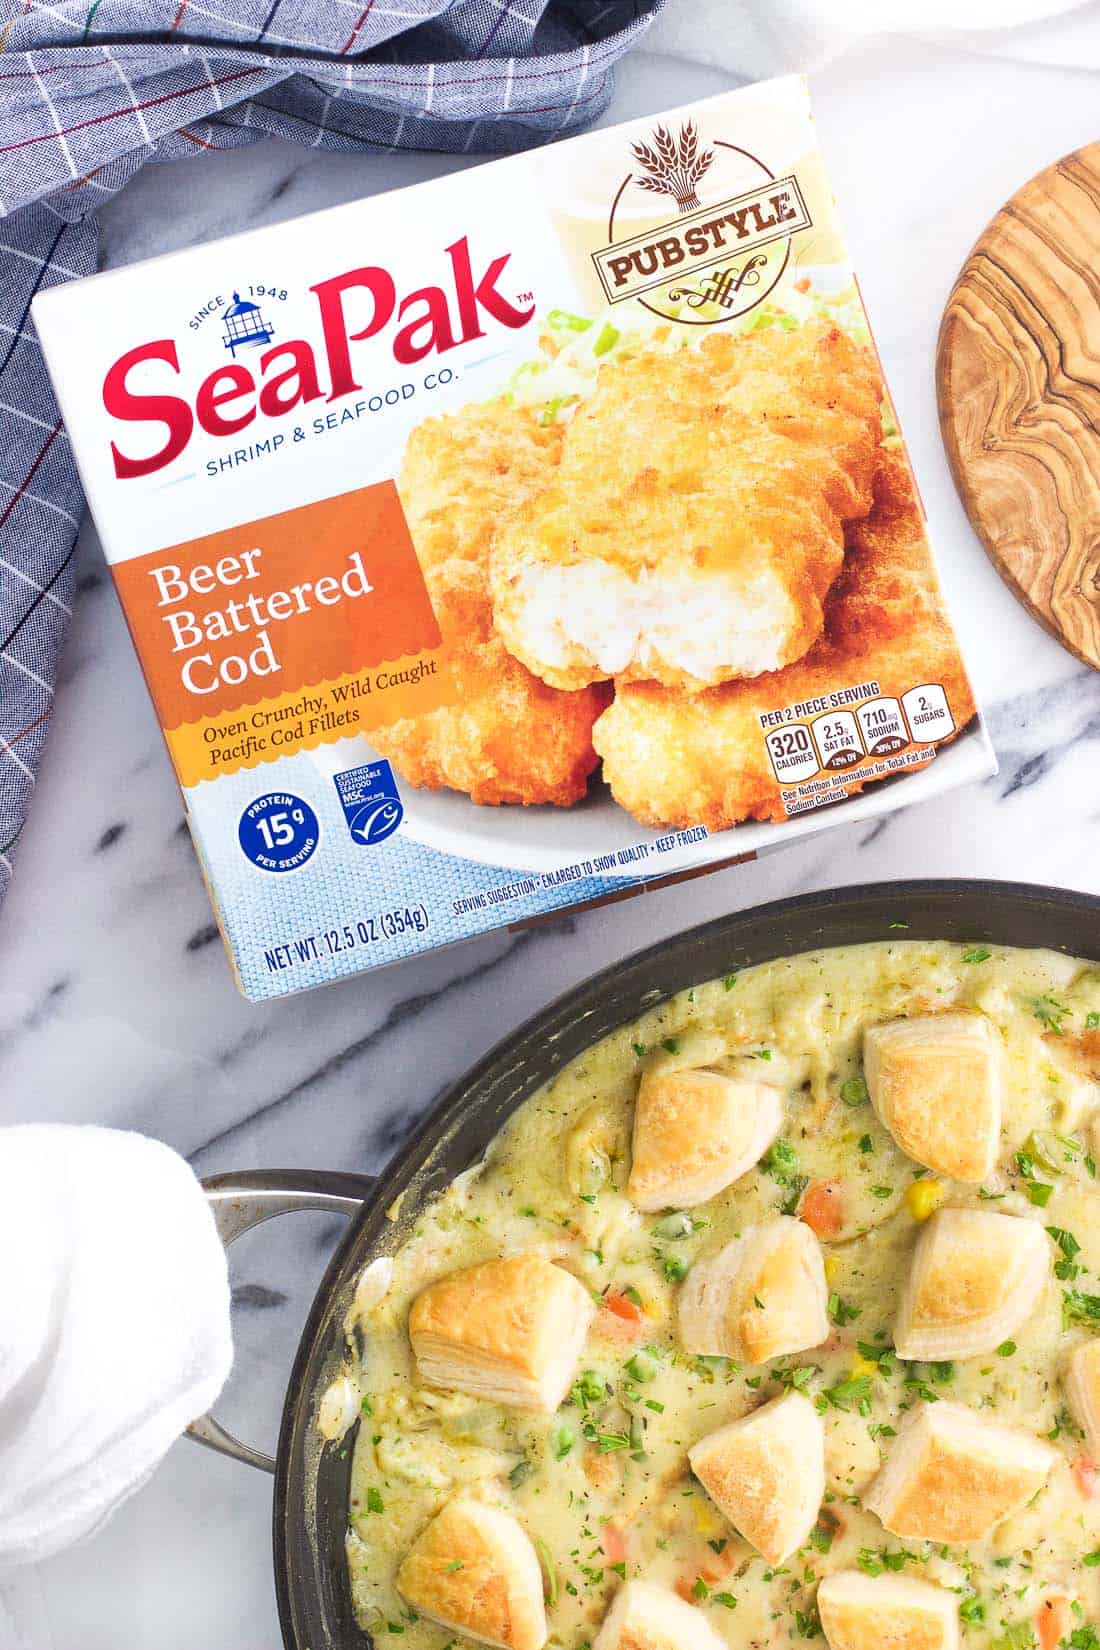 An overhead shot of a SeaPak beer battered cod package next to the skillet pot pie